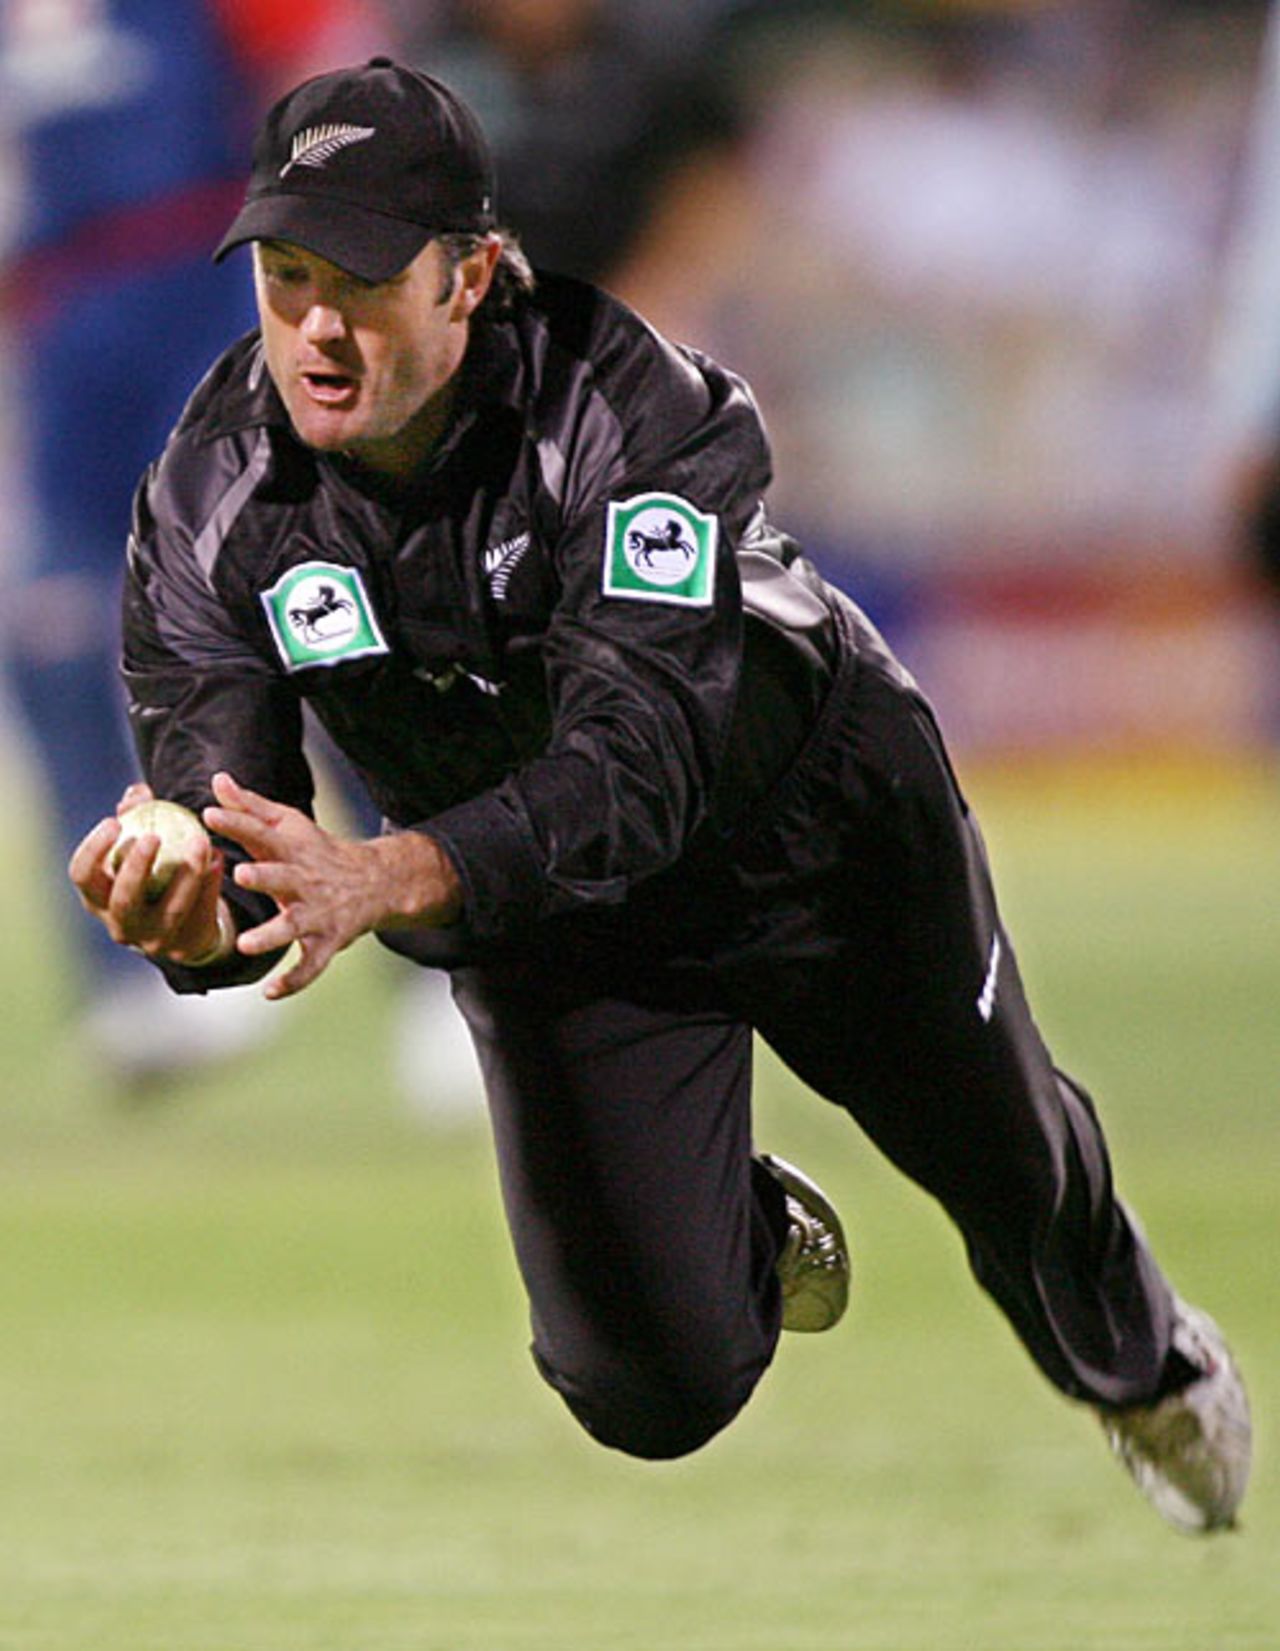 Nathan Astle keeps his eye on the ball to take a fine, low catch, England v New Zealand, CB Series, Adelaide, January 23, 2007